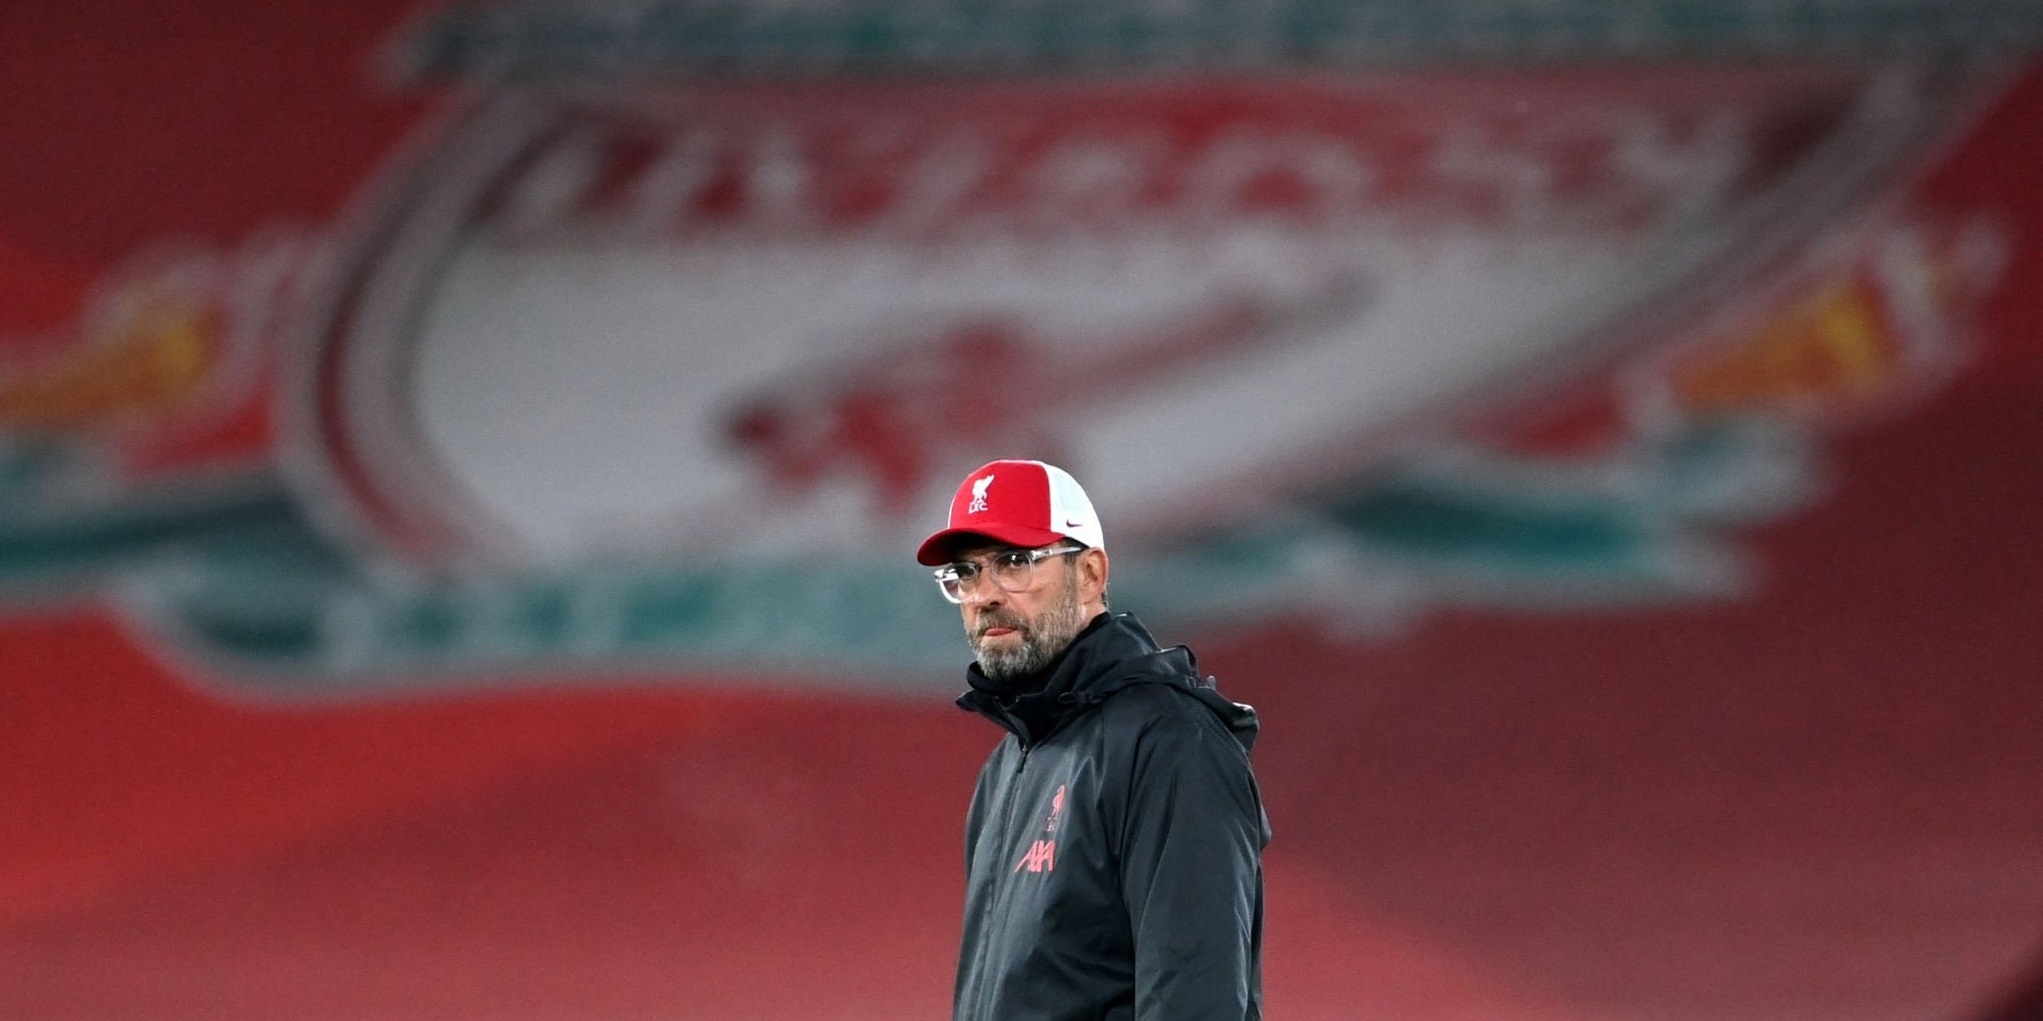 ‘Could this squad be improved? Yes’ – Jurgen Klopp hints at Liverpool’s summer transfer plans